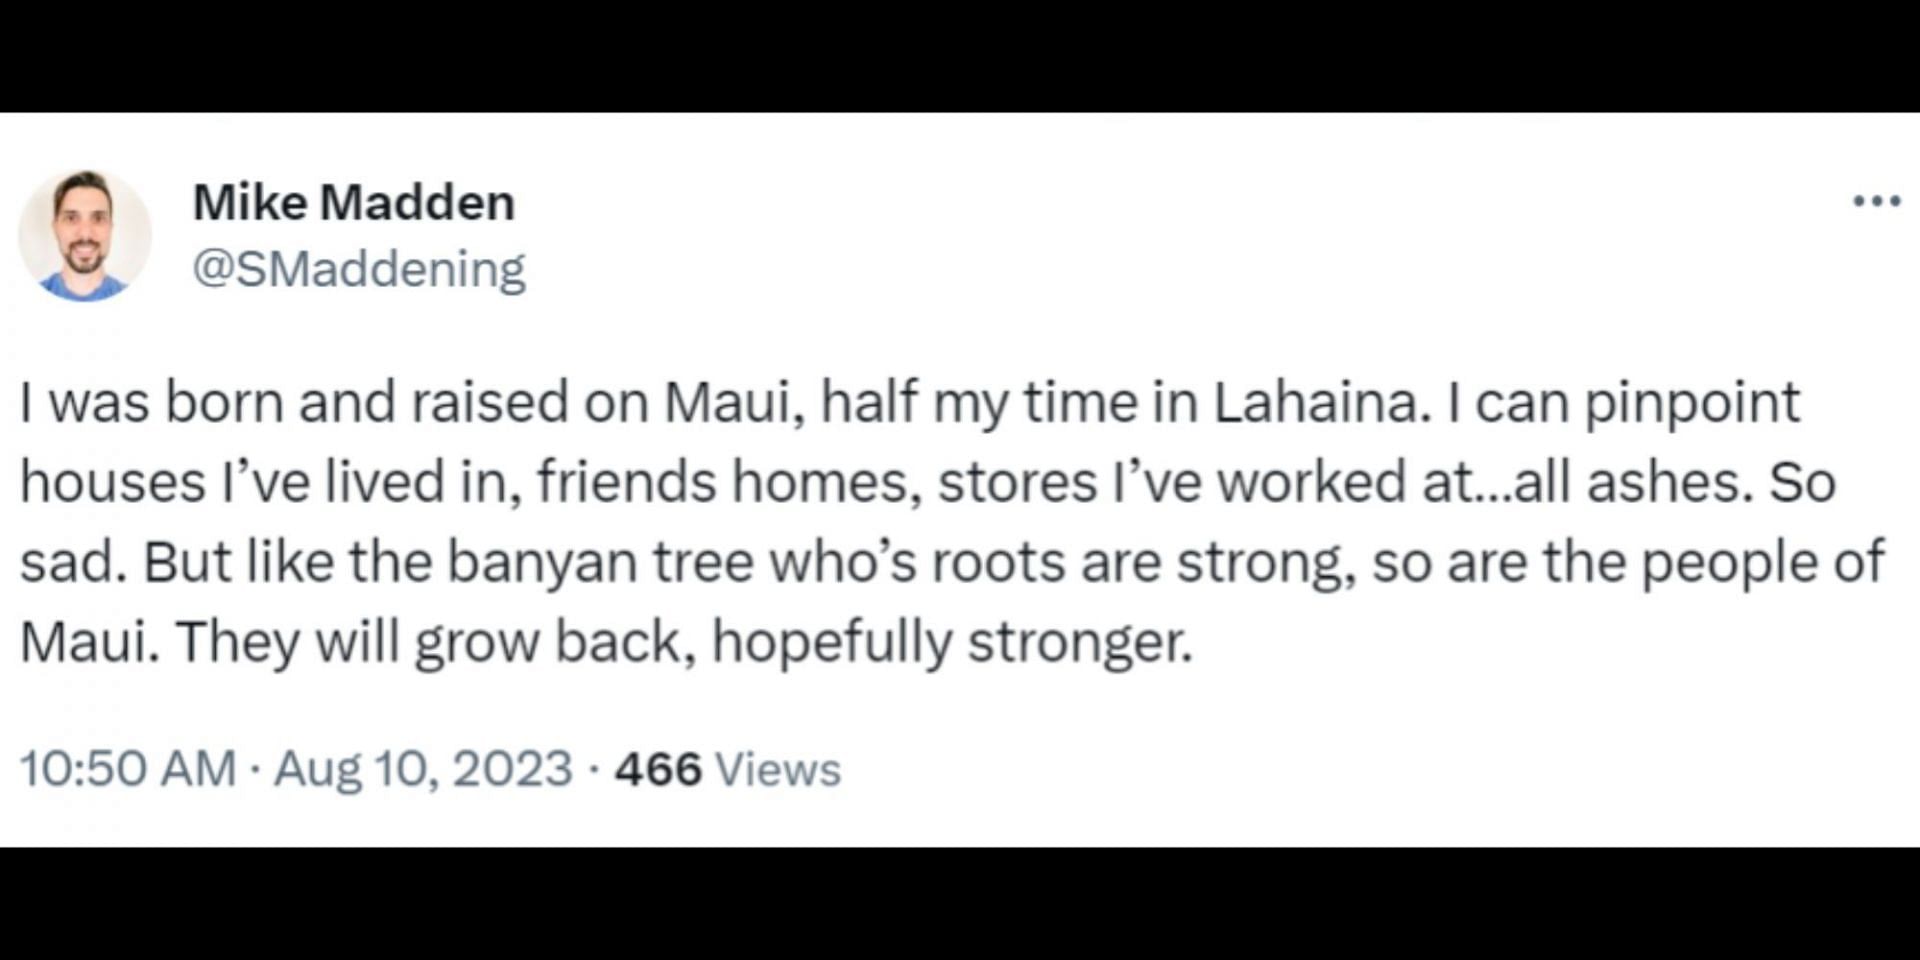 Netizens express concern for the people and businesses in Maui after wildfire broke out on Tuesday. (Image via Twitter/@KanekoaTheGreat)